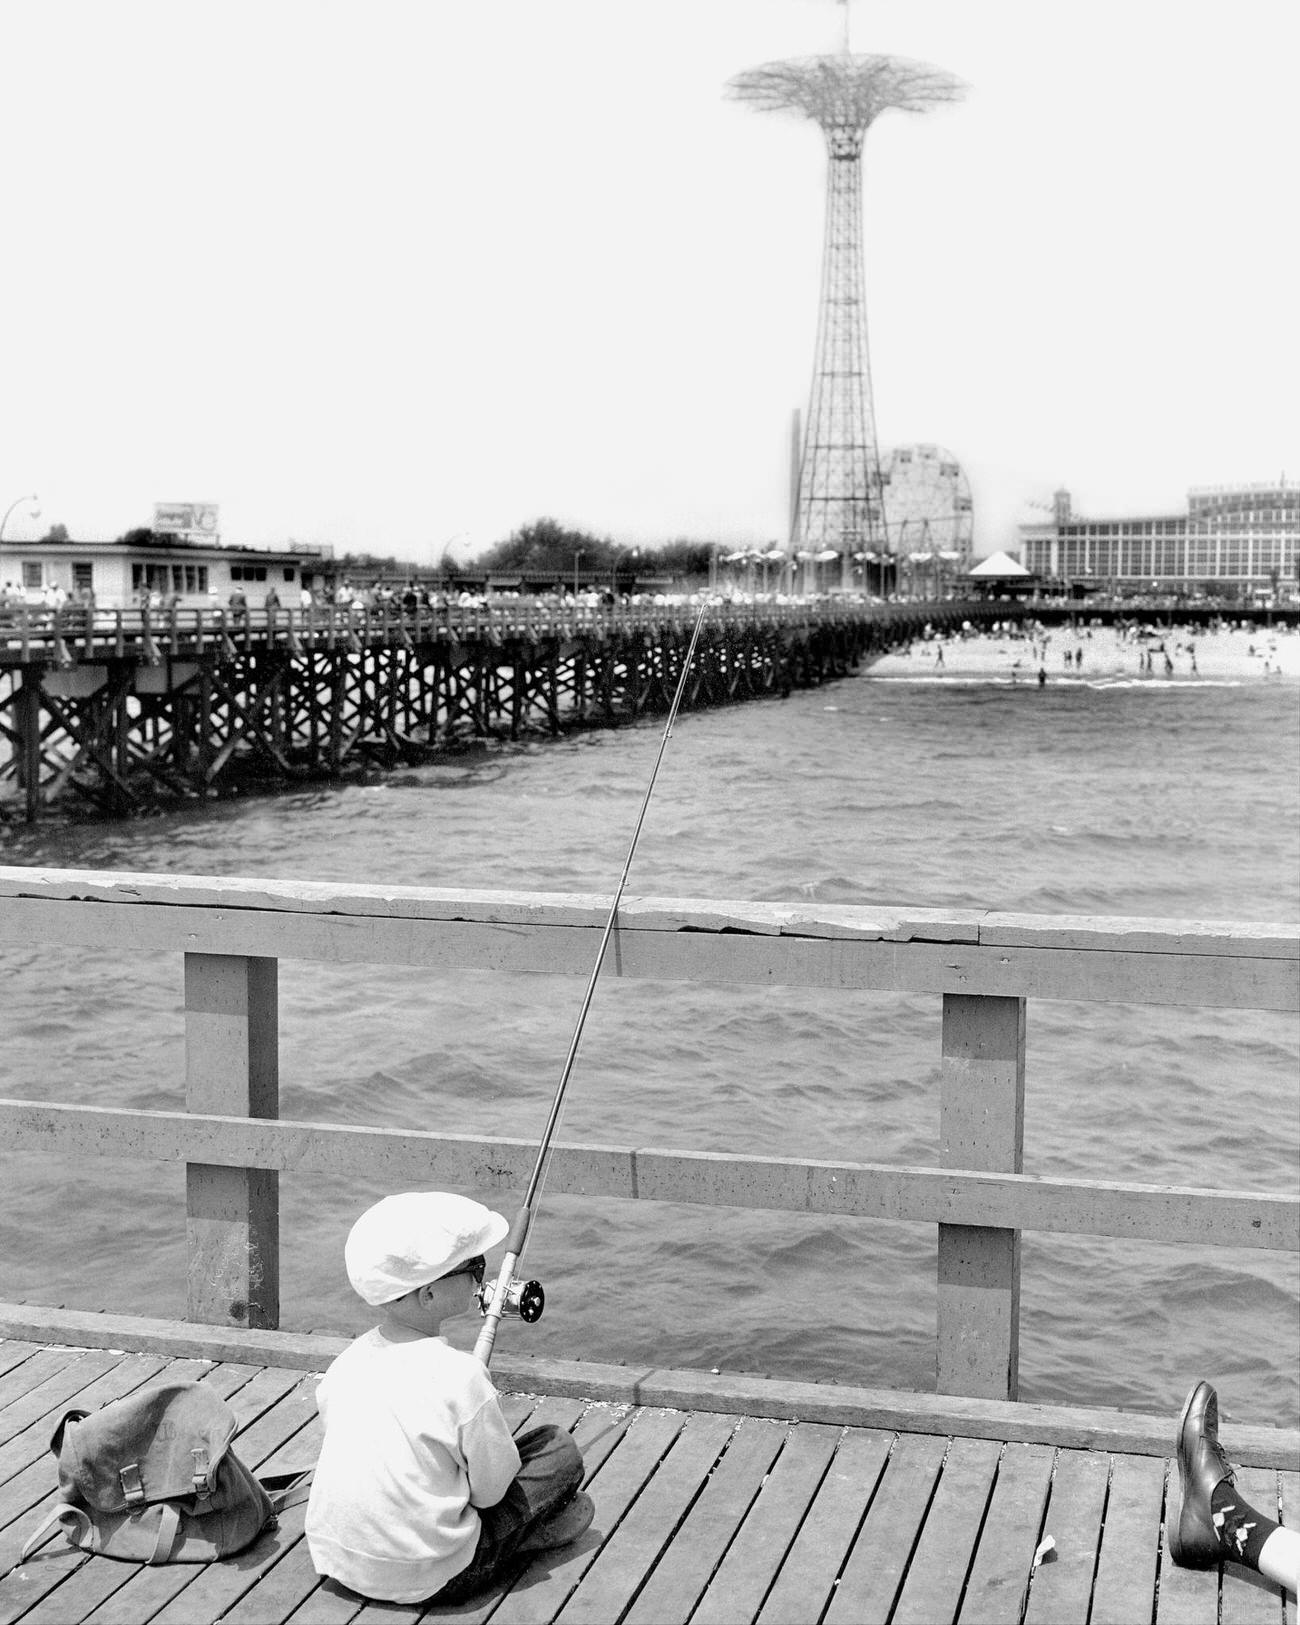 Young Fisherman Finds Solitude At Steeplechase Pier, May 1957